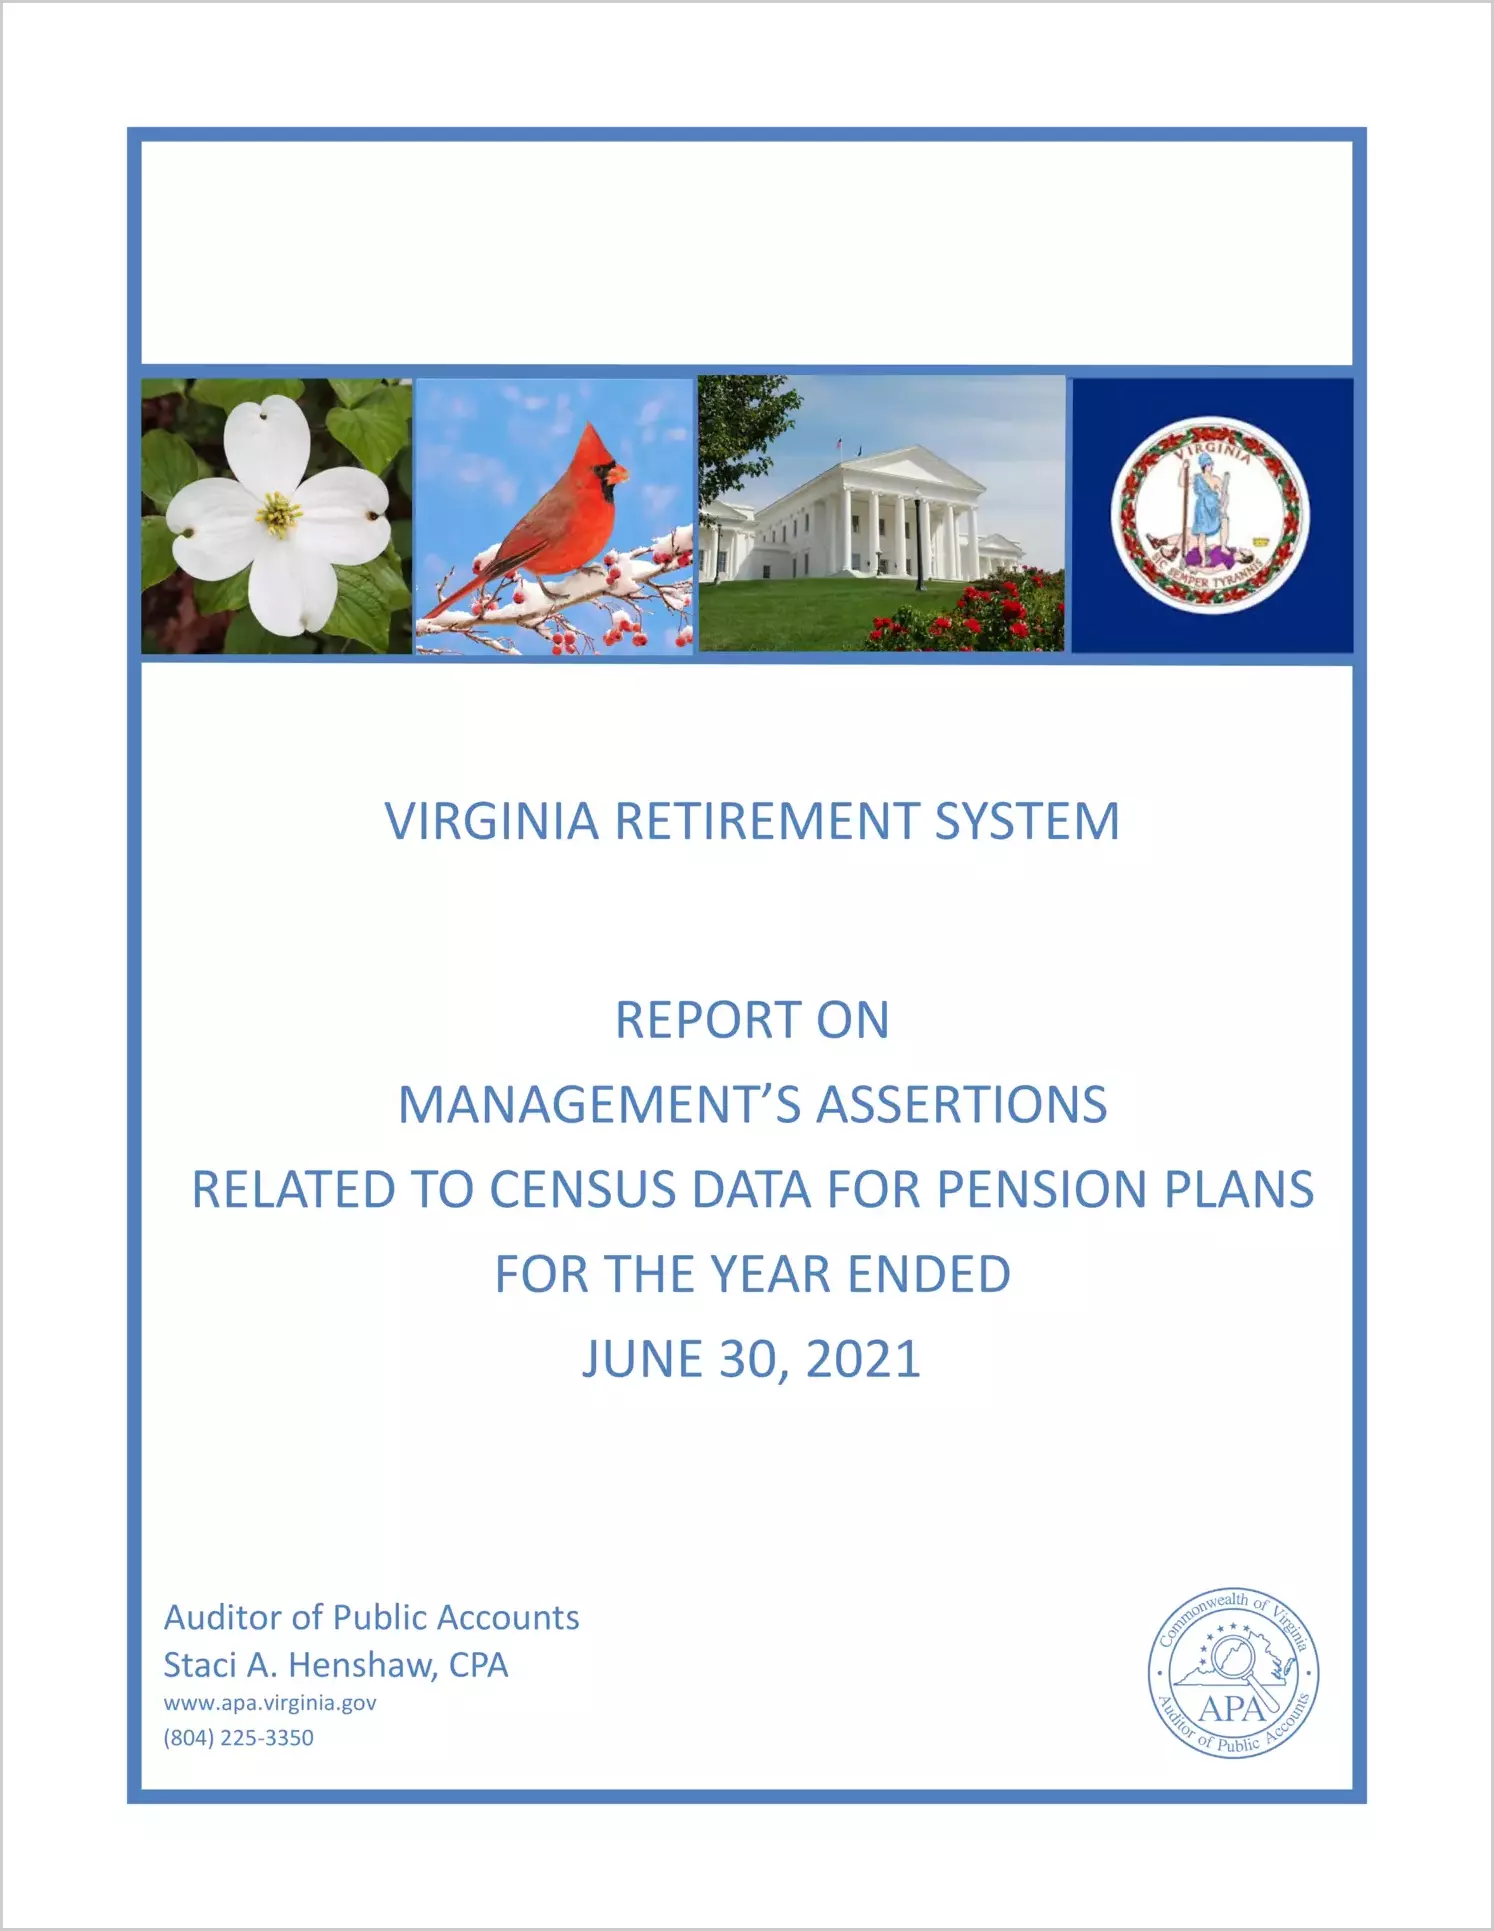 Virginia Retirement System Management's Assertions Related to Census Data for Pension Plans for the year ended June 30, 2021